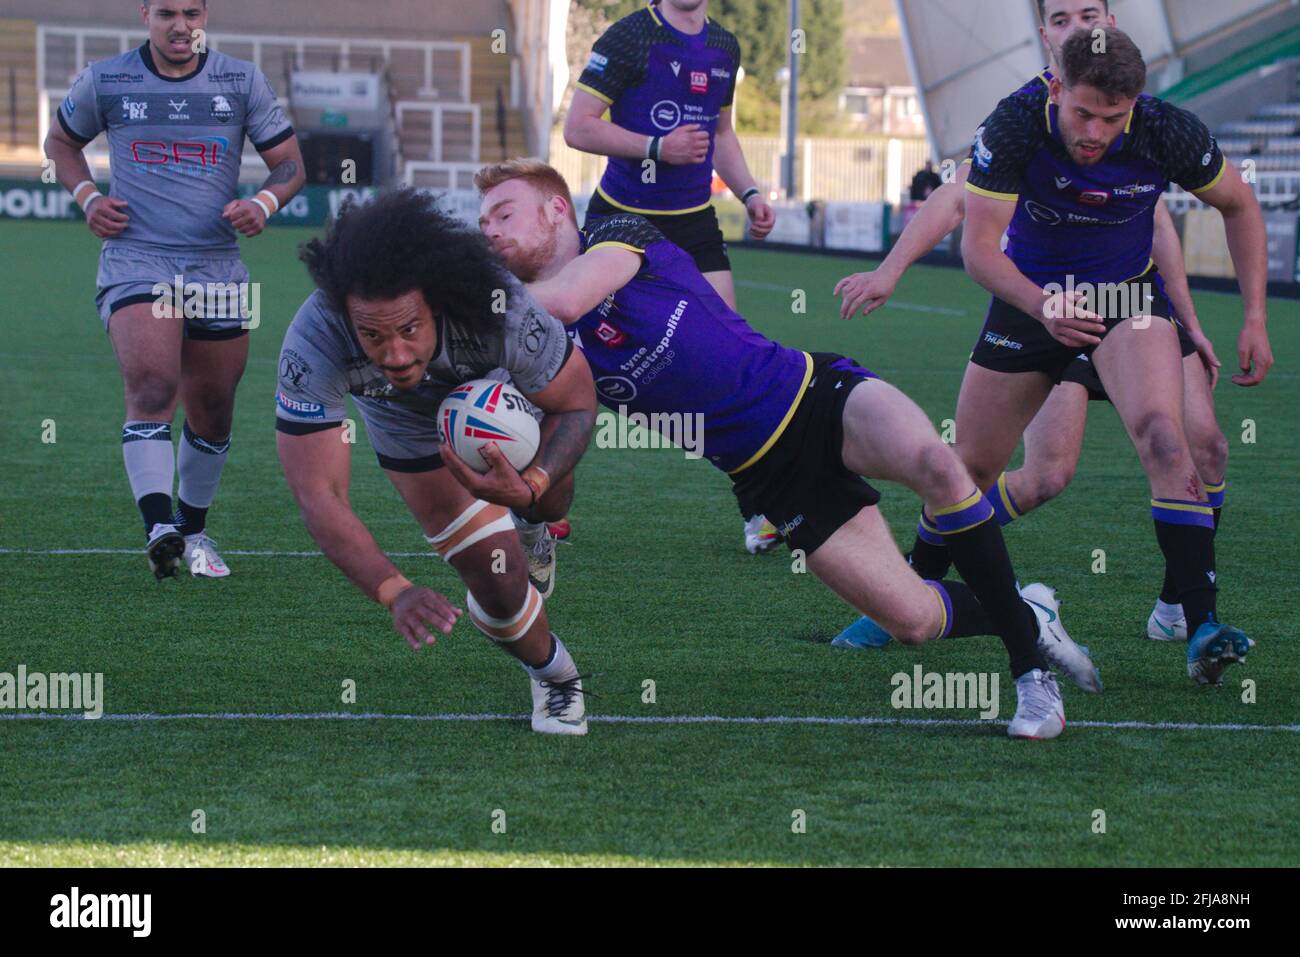 Newcastle upon Tyne, England, 25 April 2021. Joel Farrell diving to score a try for Sheffield Eagles against Newcastle Thunder in the Betfred Championship match at Kingston Park. Credit: Colin Edwards/Alamy Live News. Stock Photo